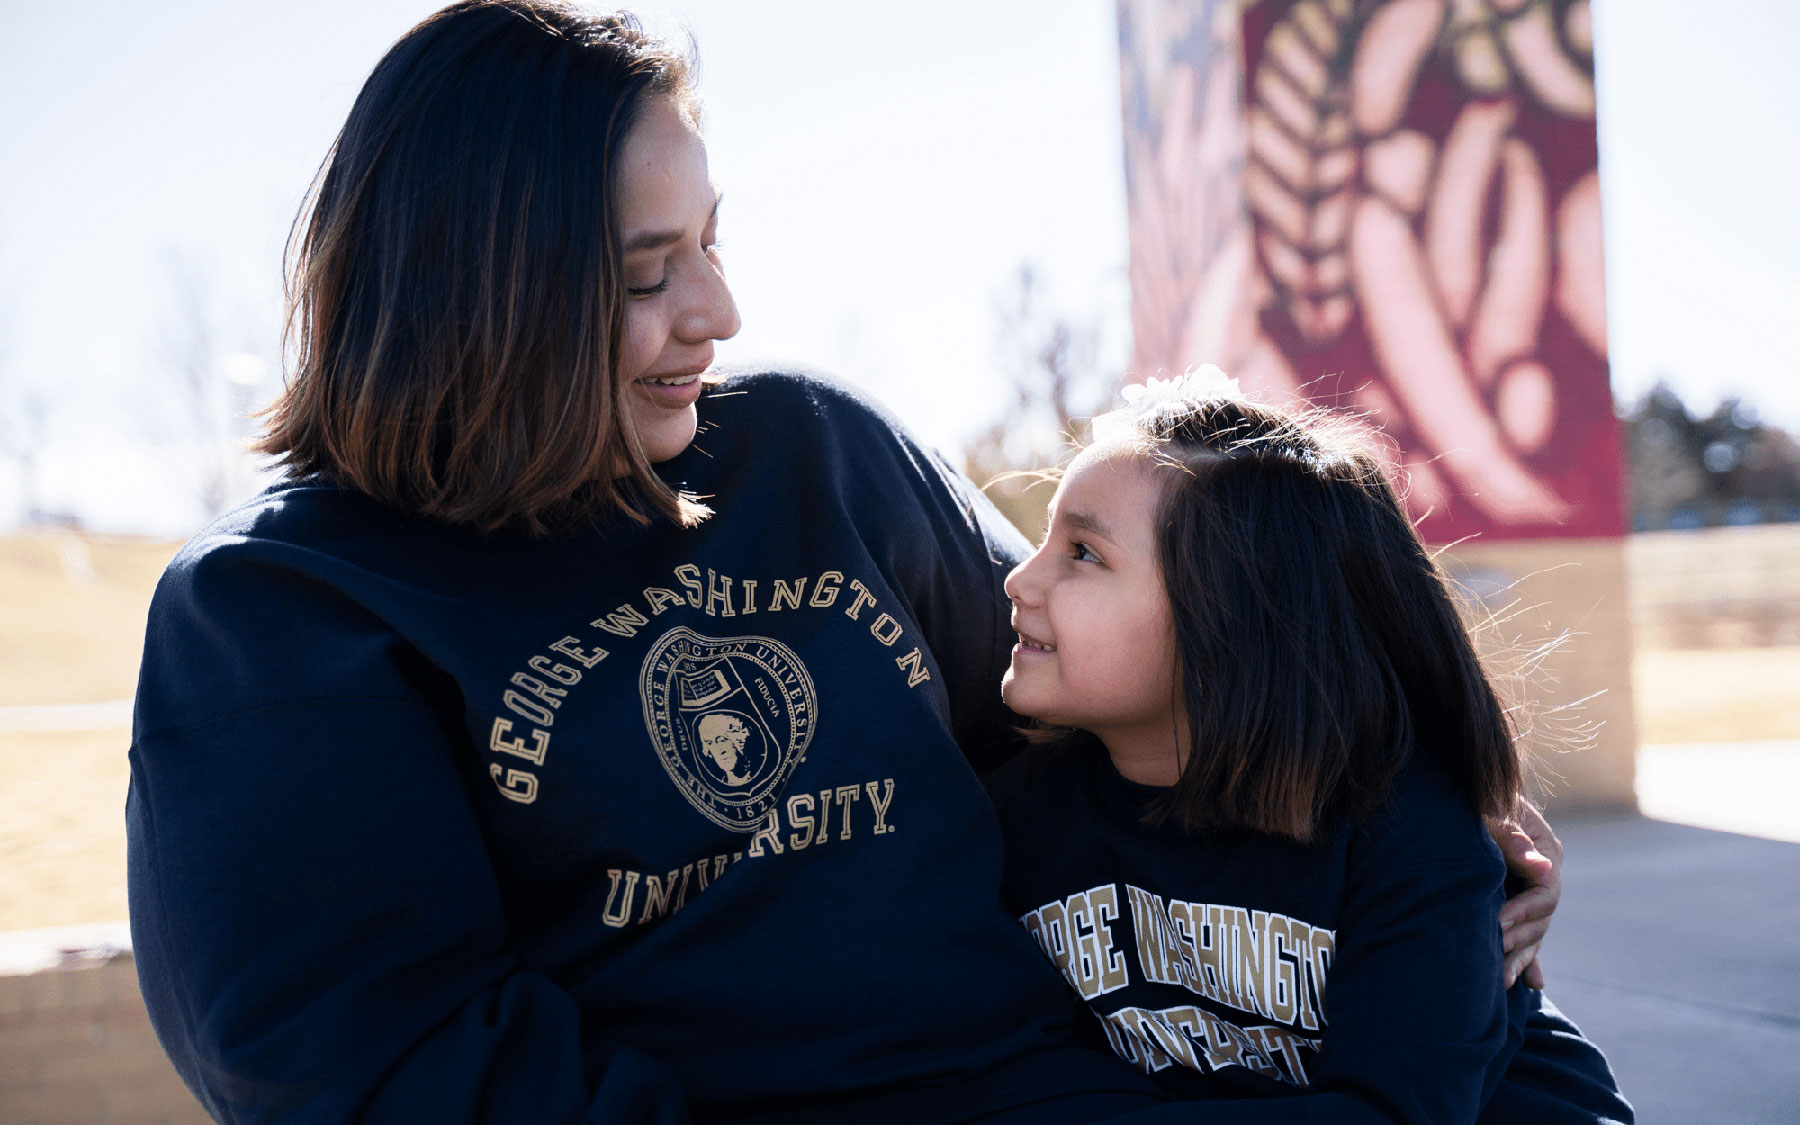 Erica Gonzalez, wearing a George Washington University sweatshirt, smiles down at her daughter as they talk together.